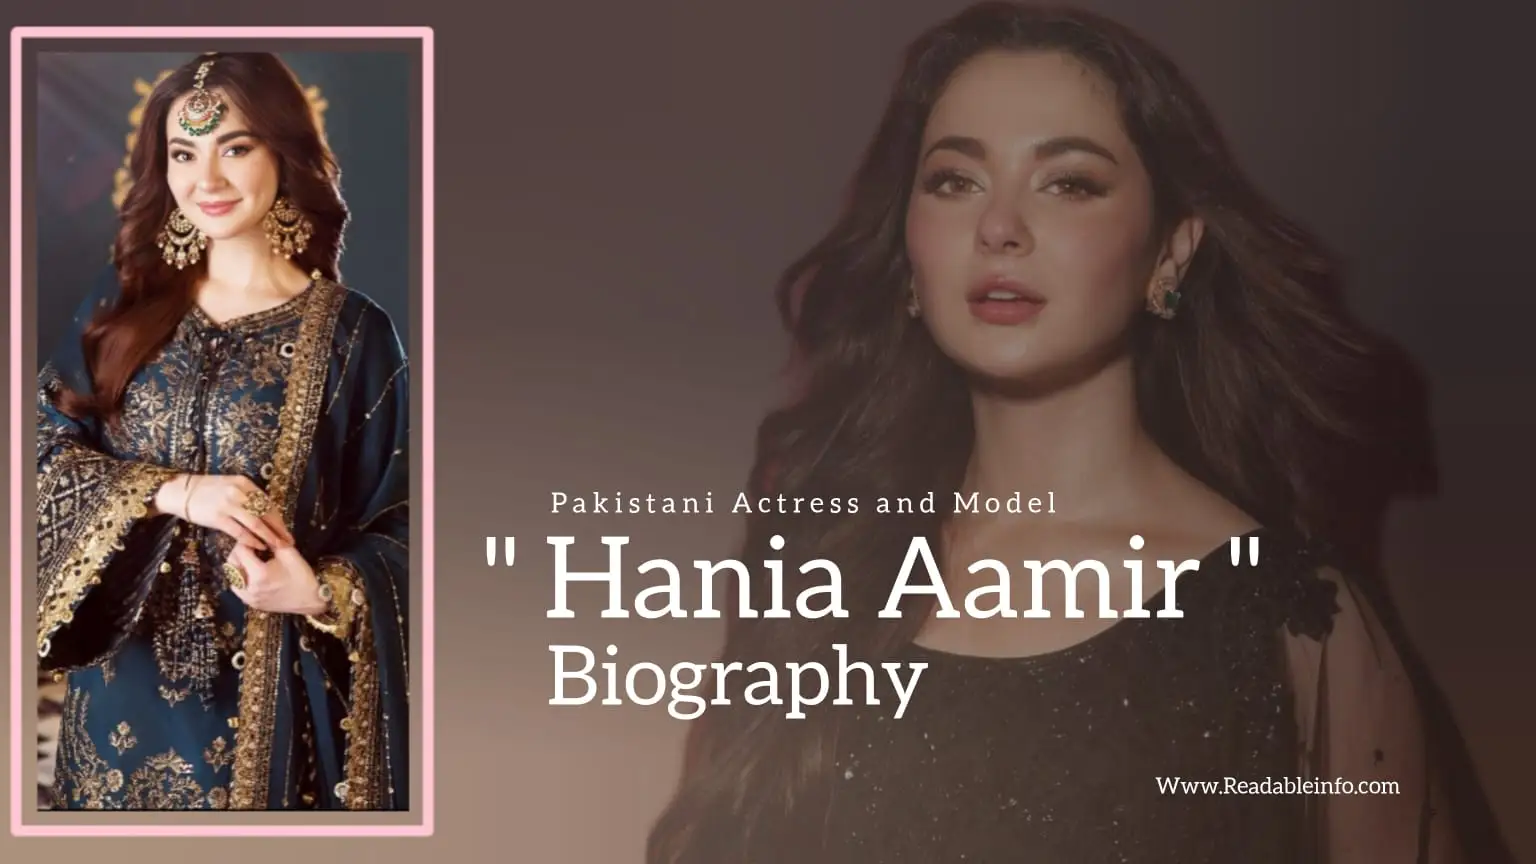 You are currently viewing Hania Aamir Biography (Pakistani Actress and Model)